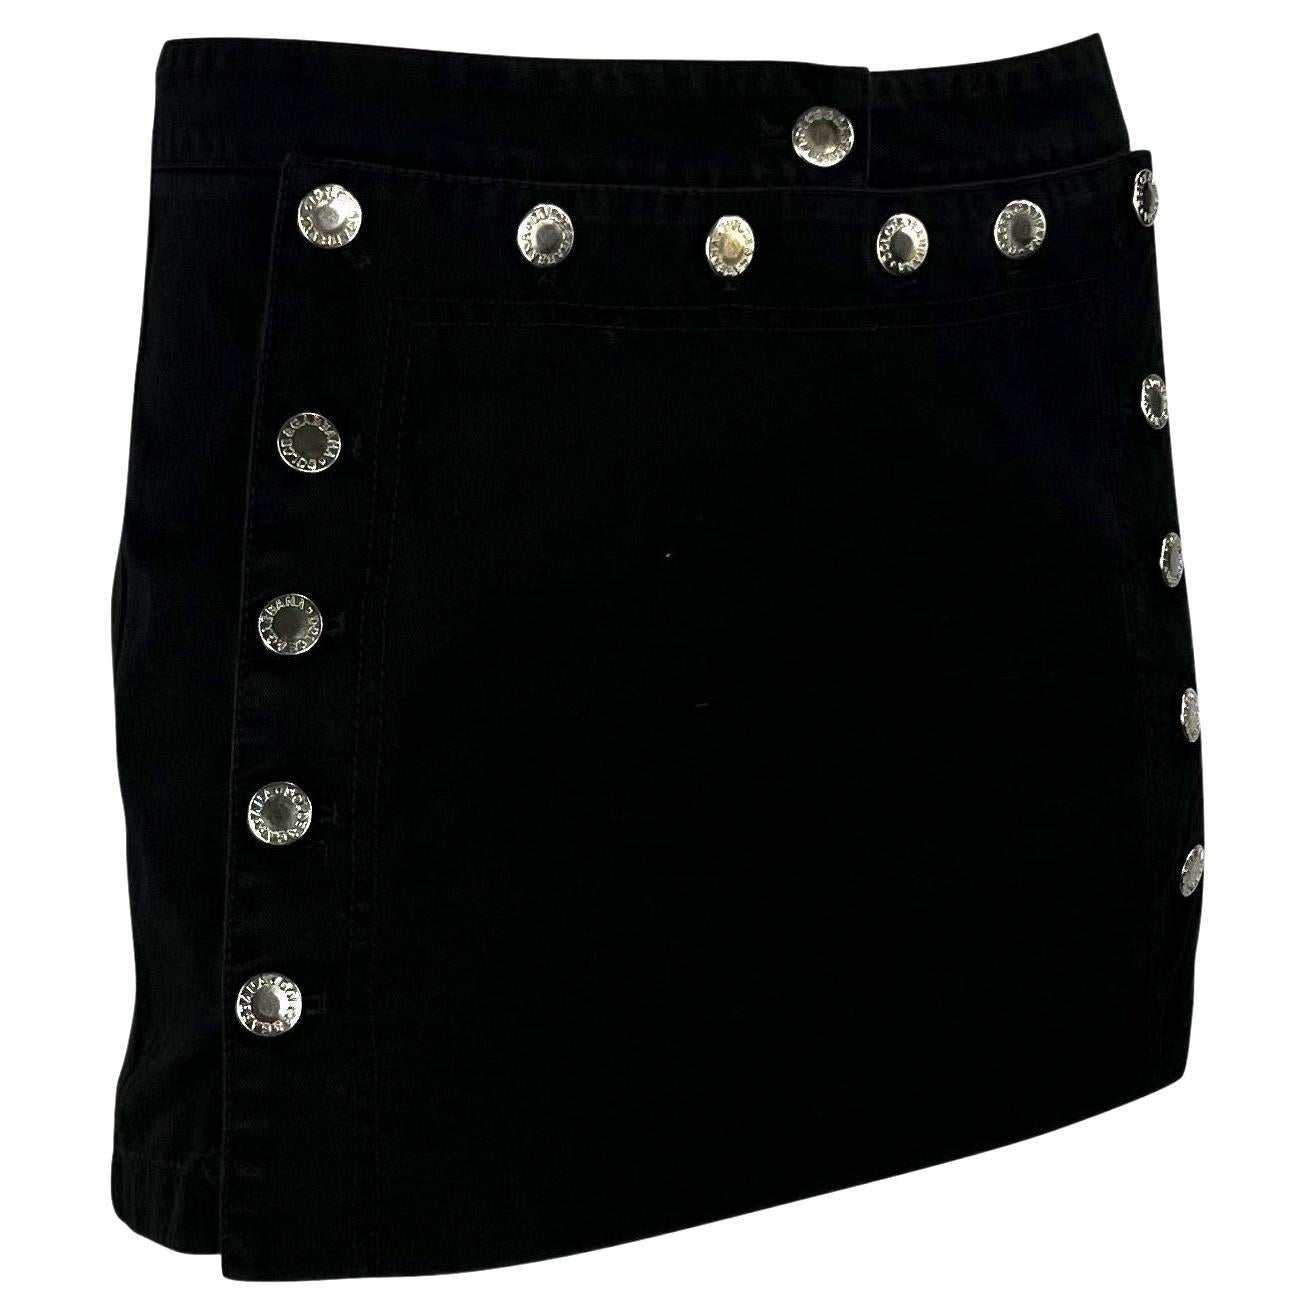 S/S 2003 Dolce & Gabbana 'Sex & Love' Flap Front Lace Up Mini Skirt For Sale 4